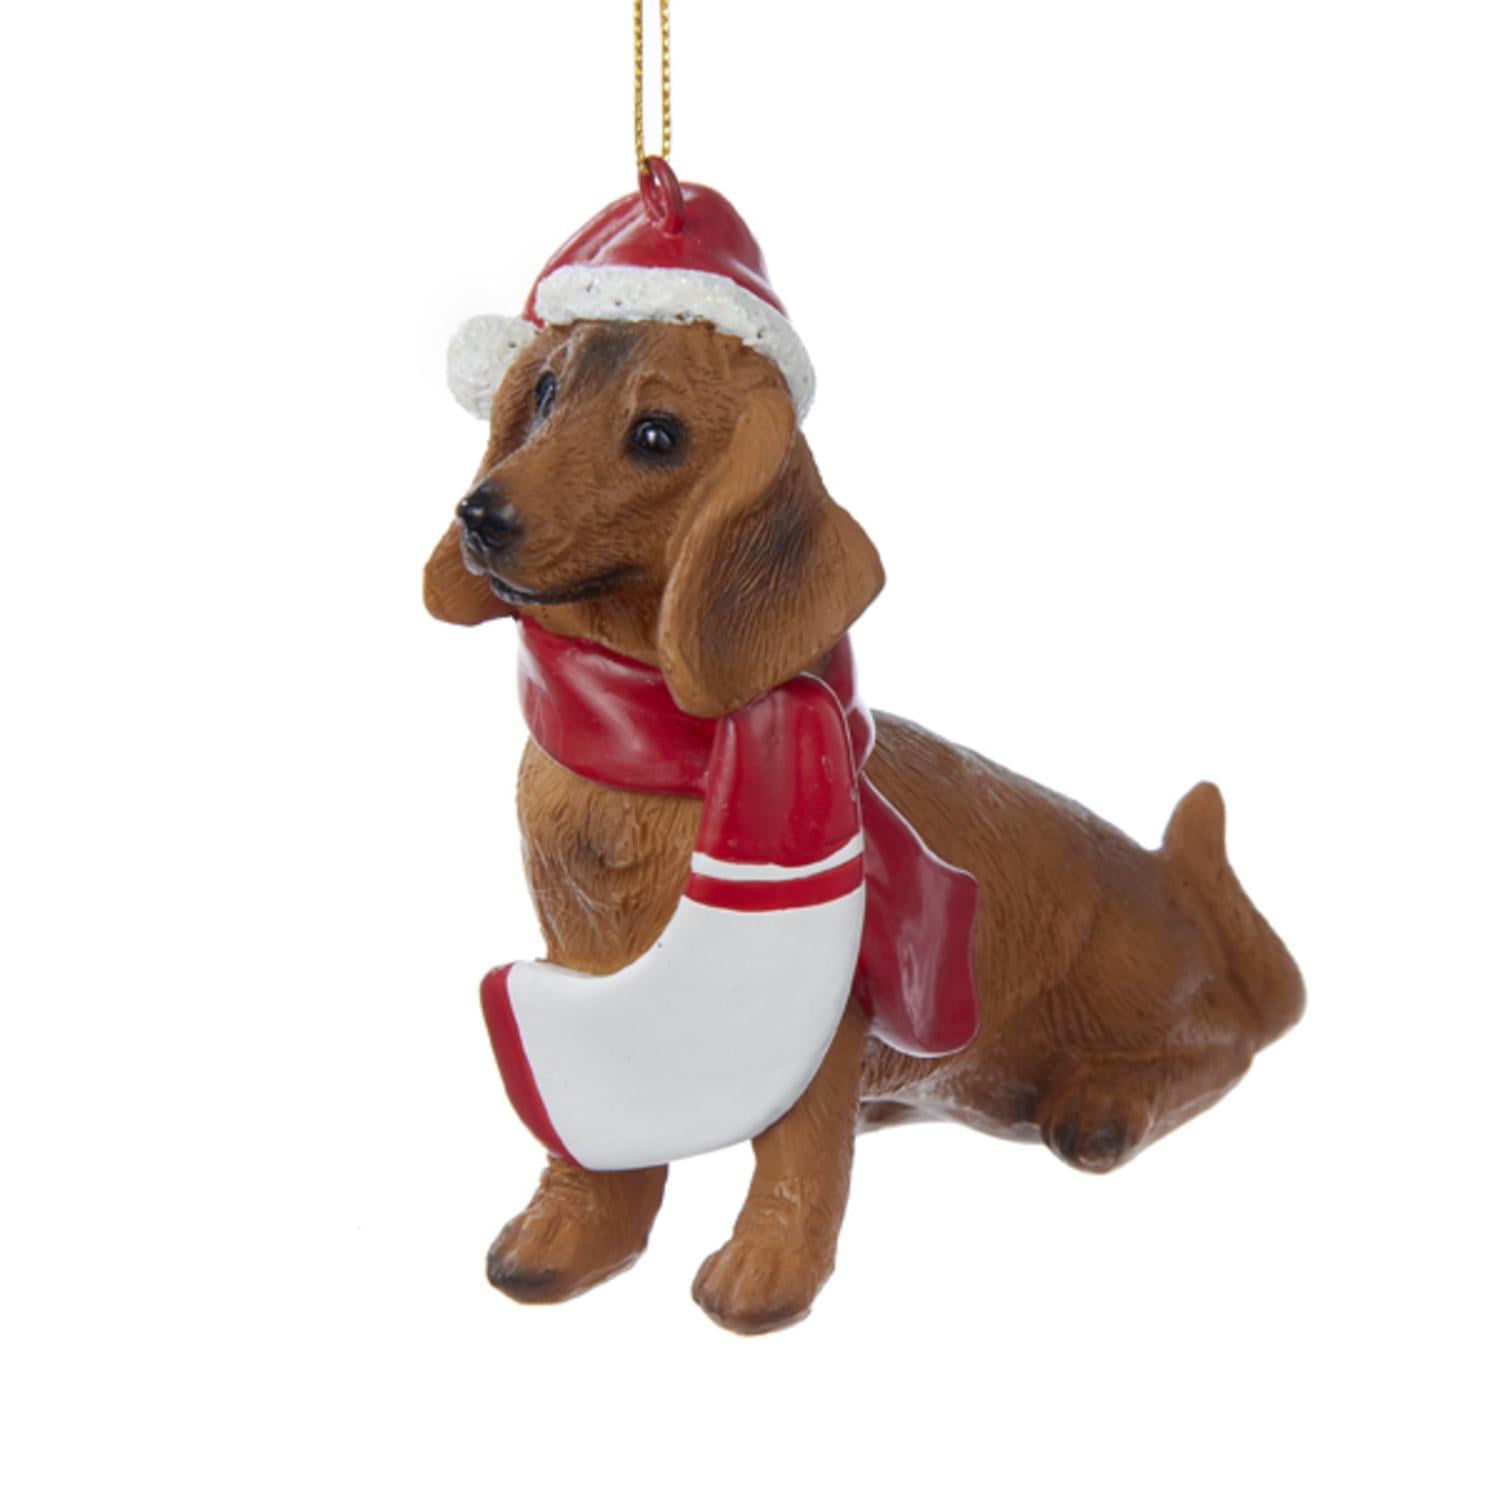 Pack of 3 Christmas Dachshund Puppy Dog Ornaments for